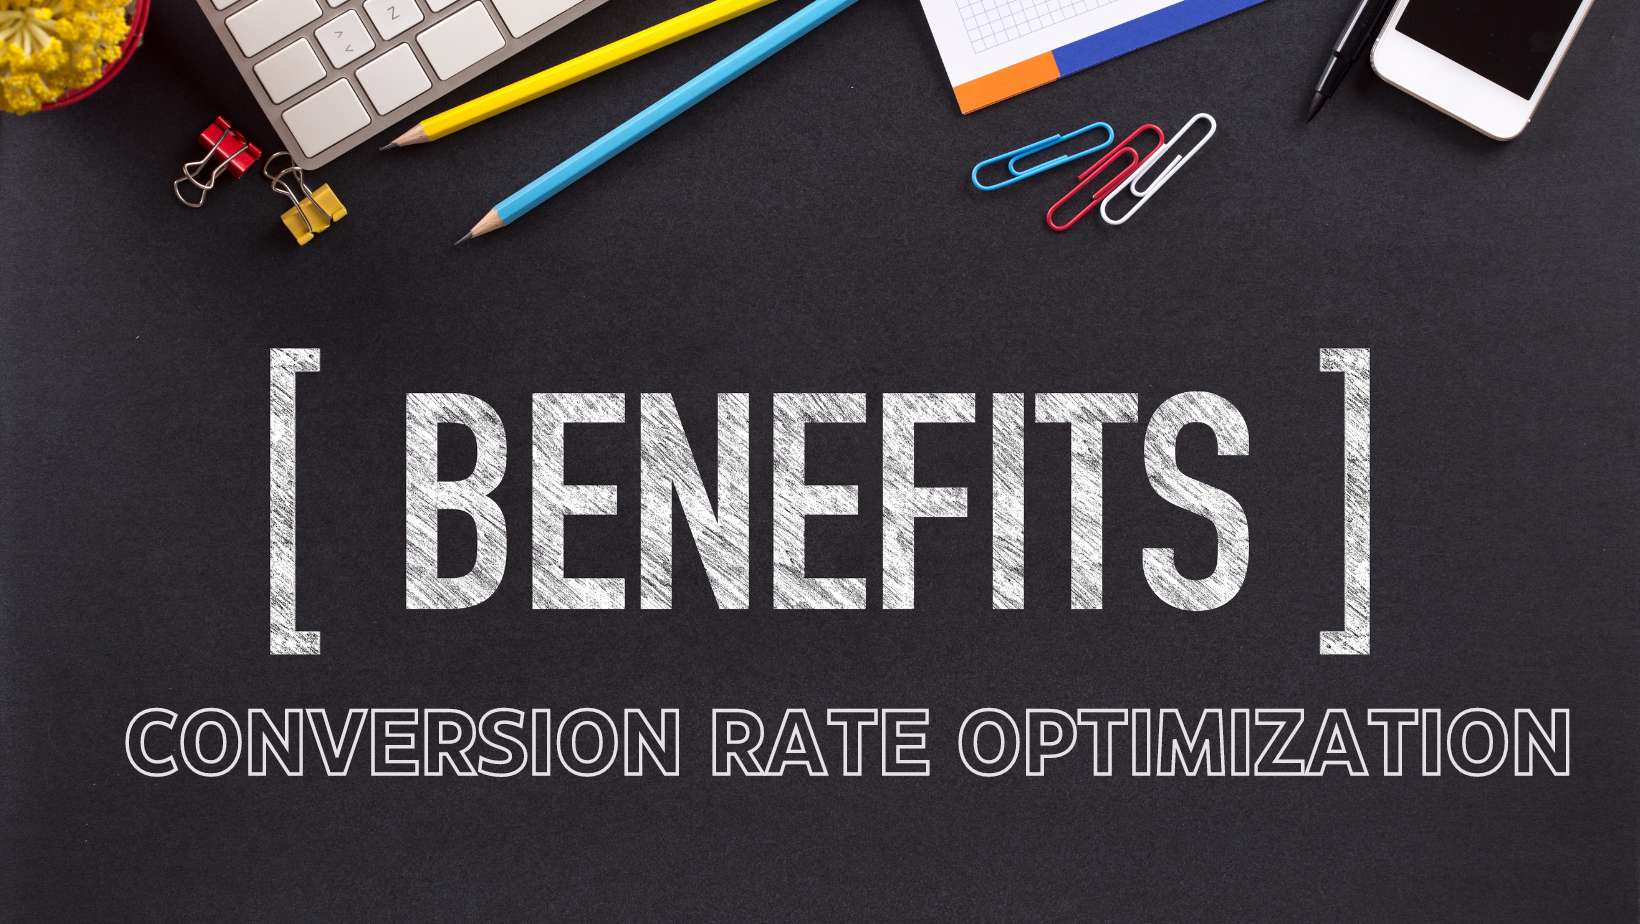 What are conversion rate optimization benefits